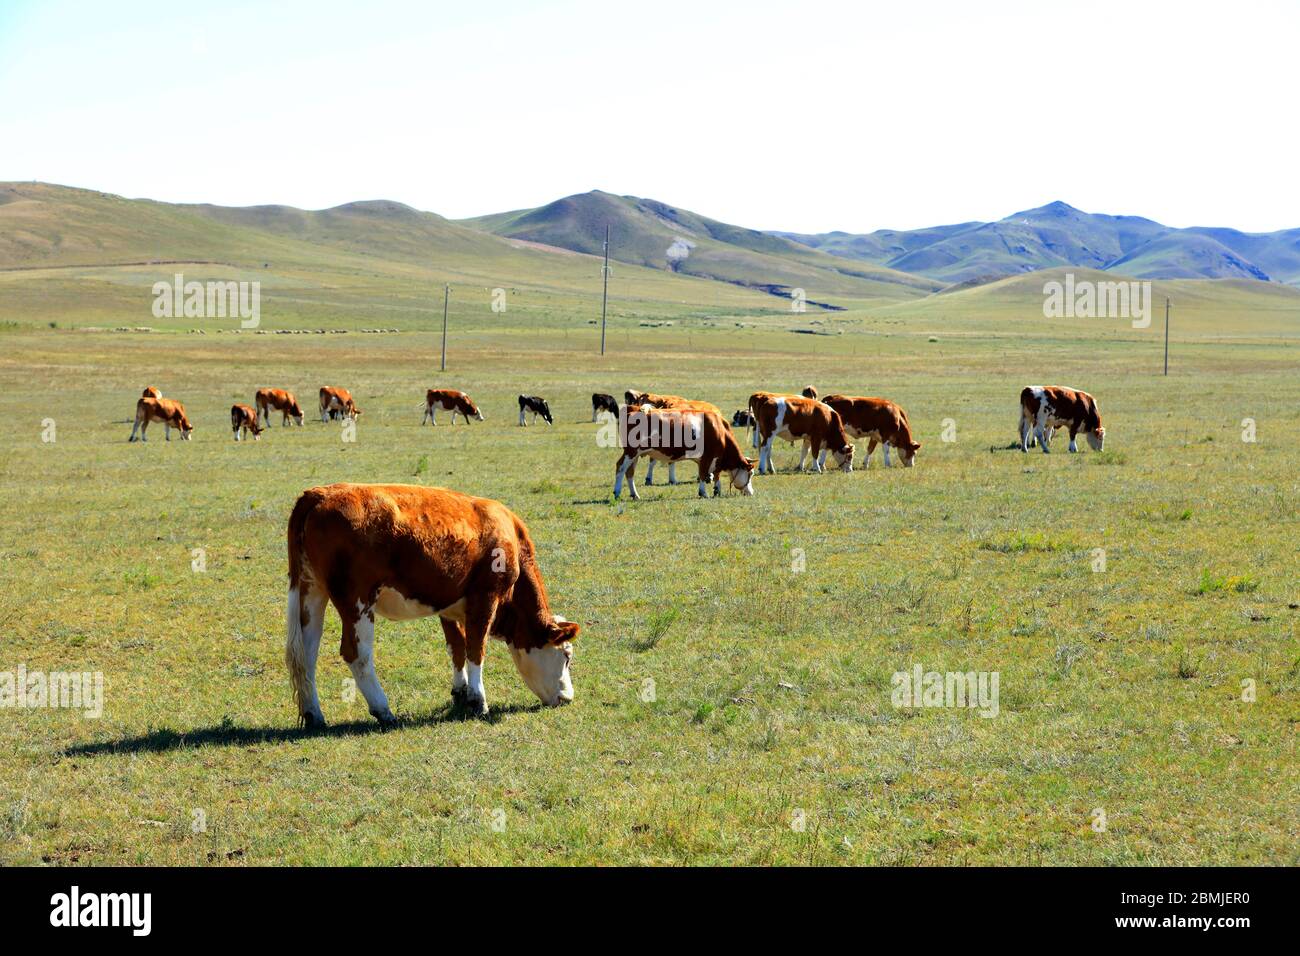 A herd of cattle are eating grass on the grassland Stock Photo